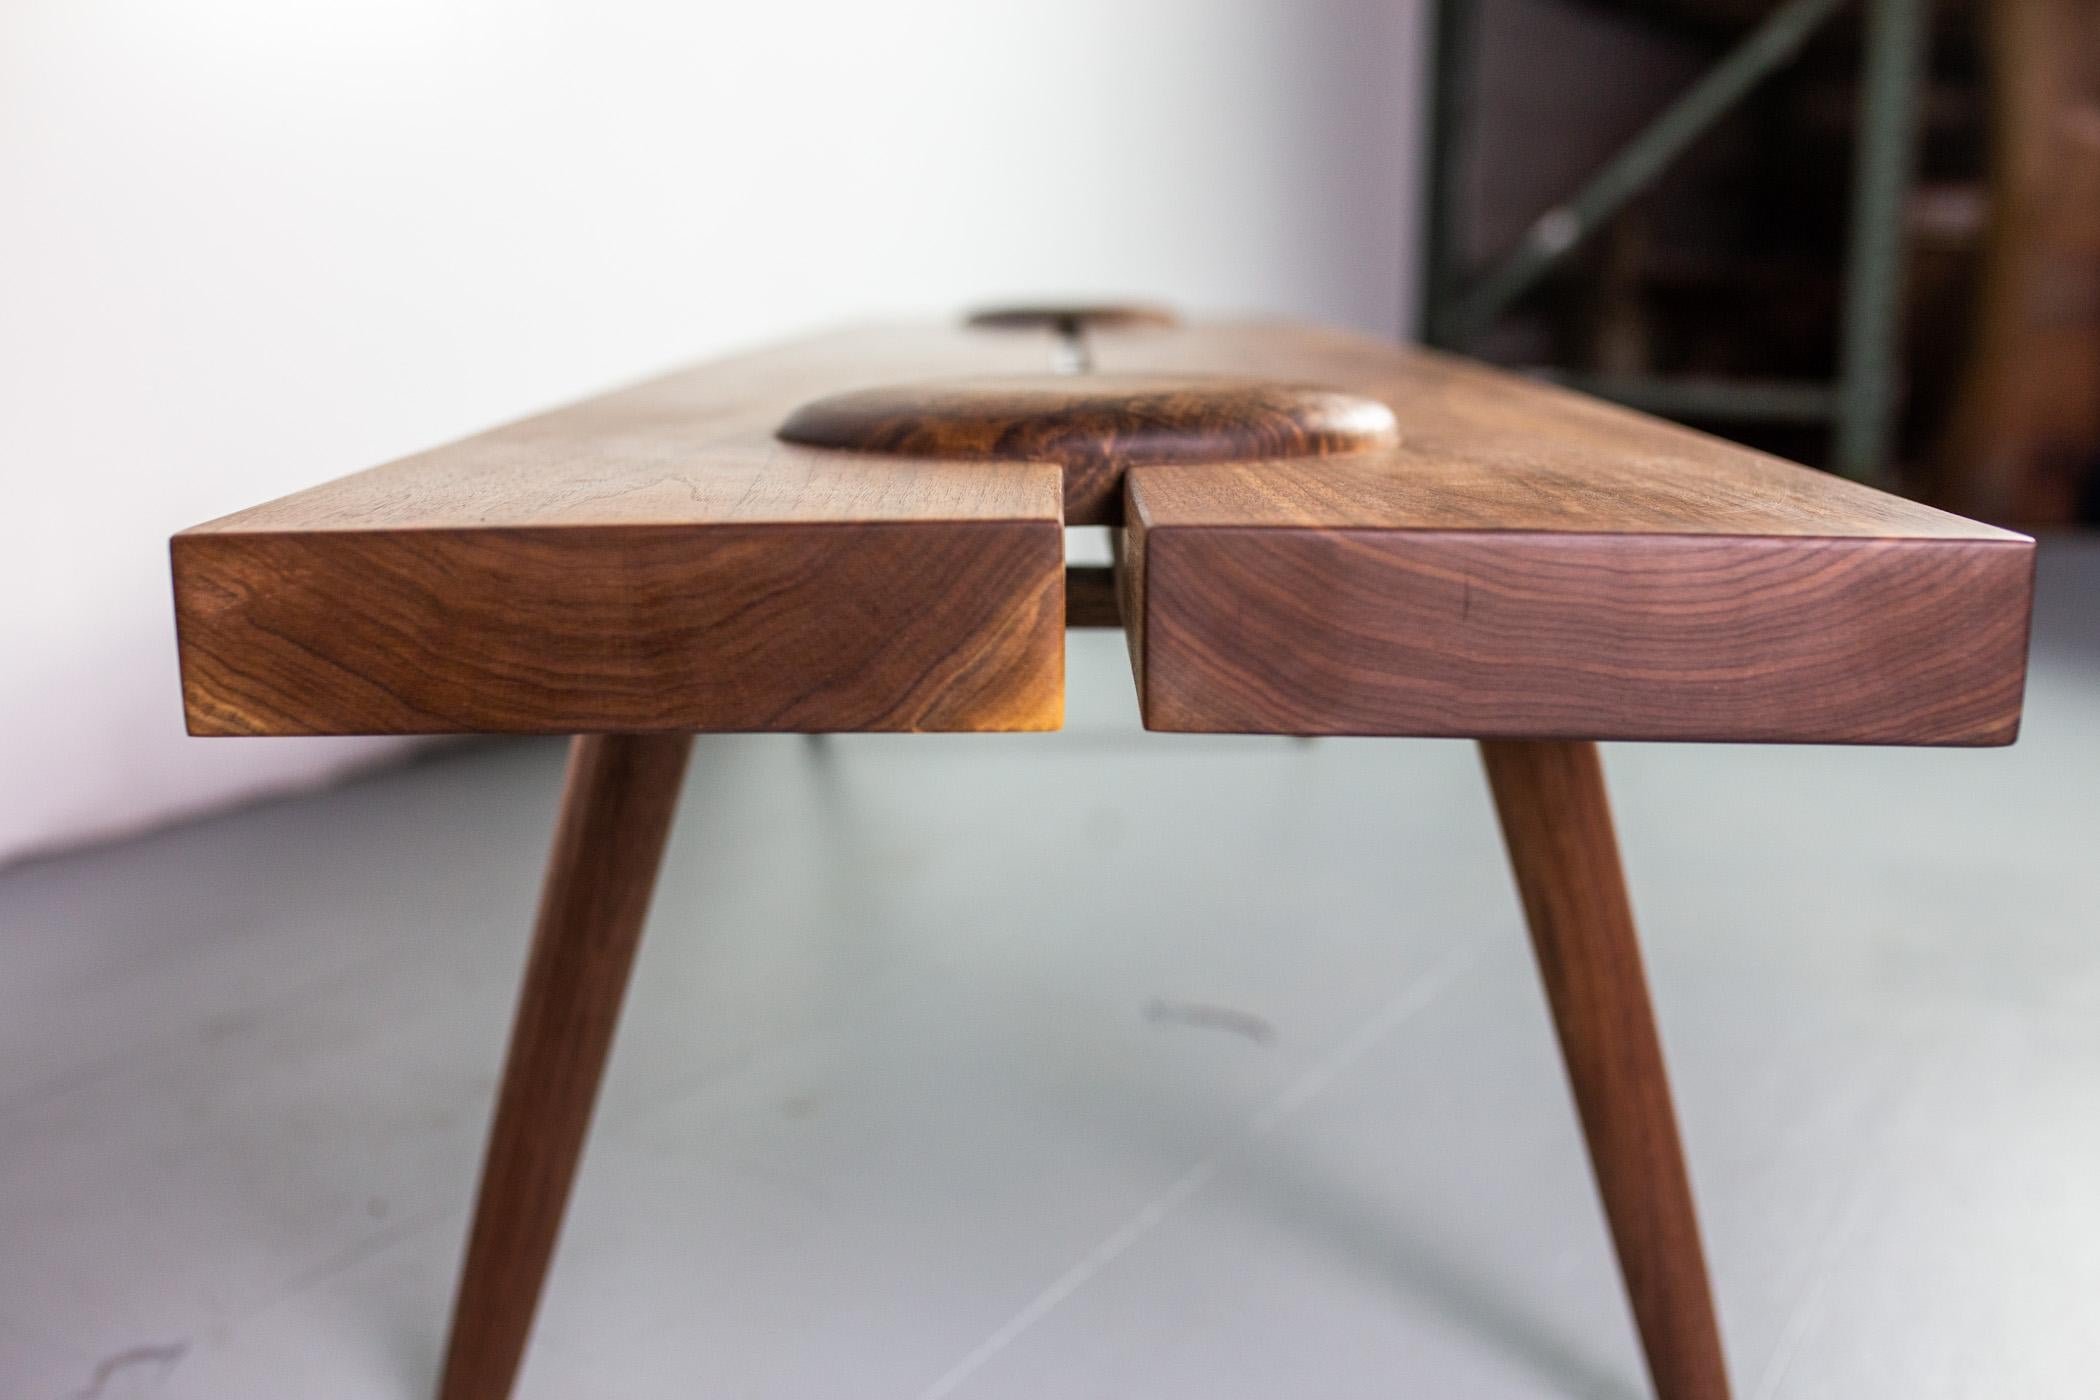 Michael Rozell Studio Dome bench or coffee table in figured walnut, USA, 2020.